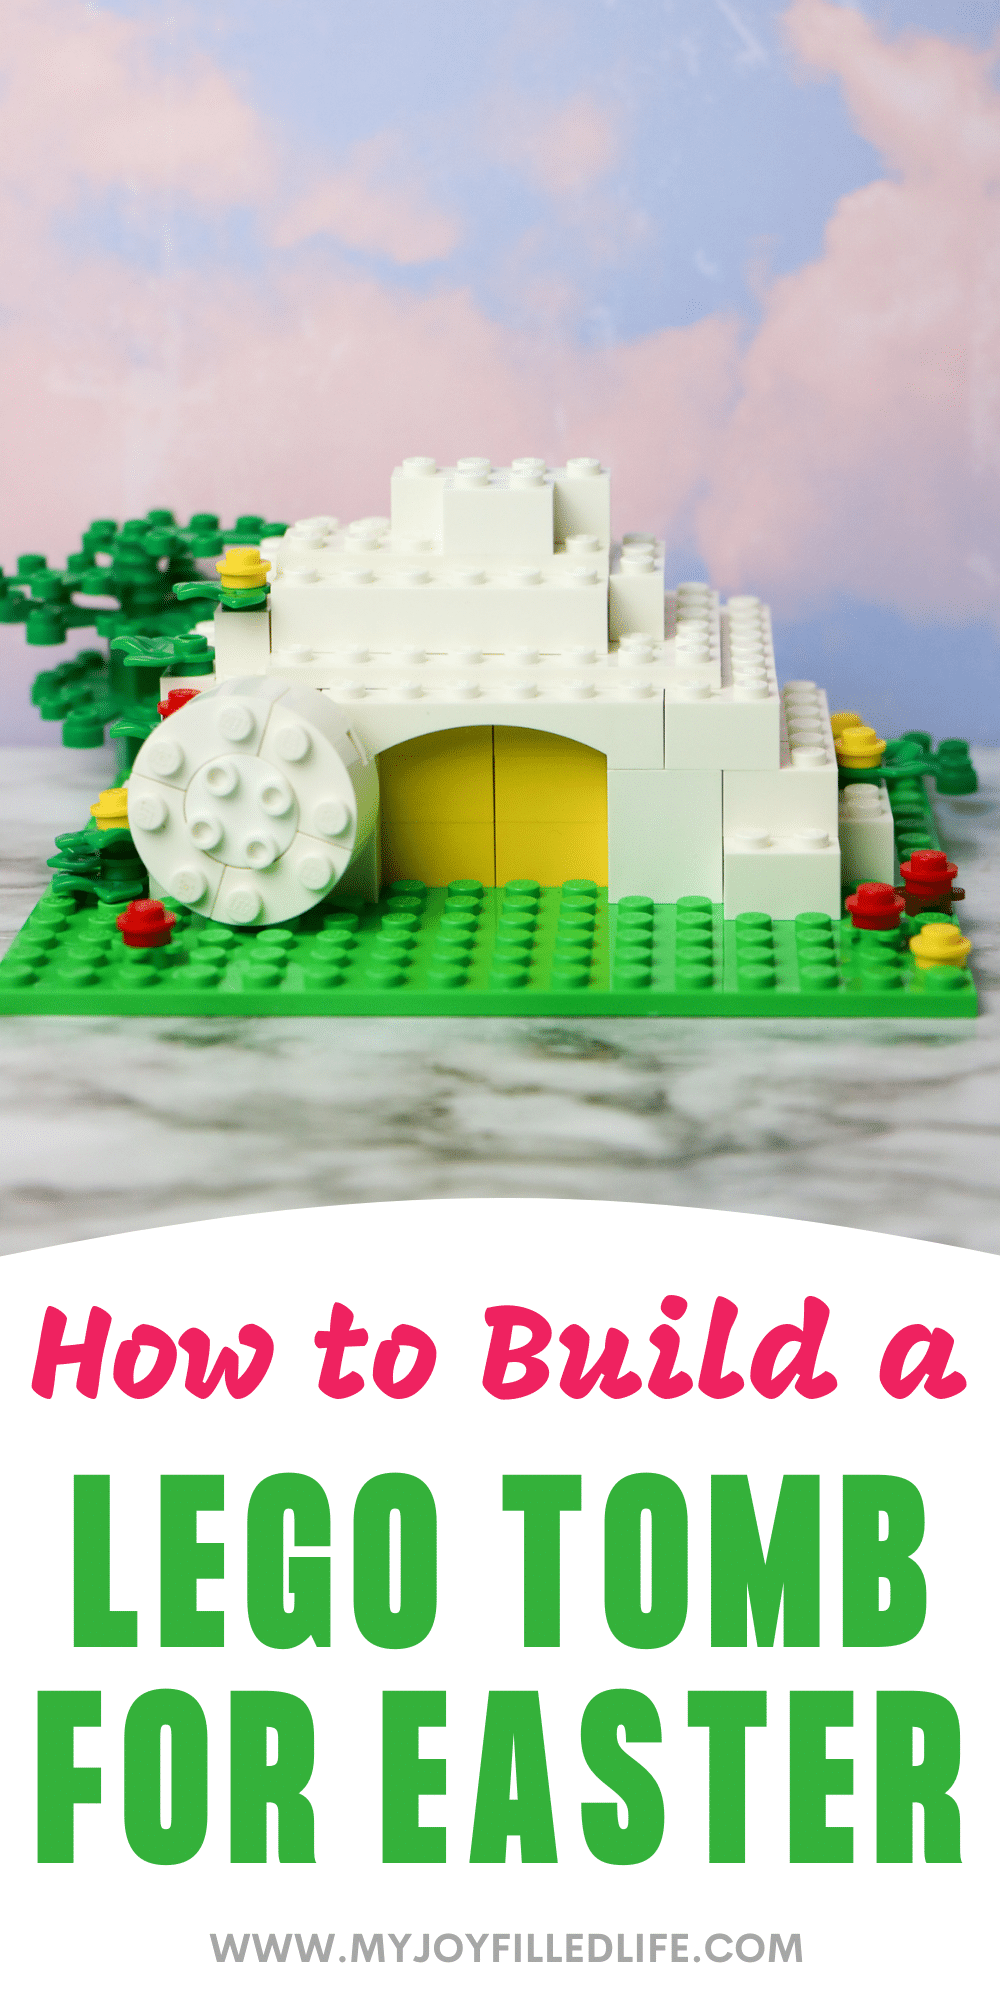 Building an Easter Tomb